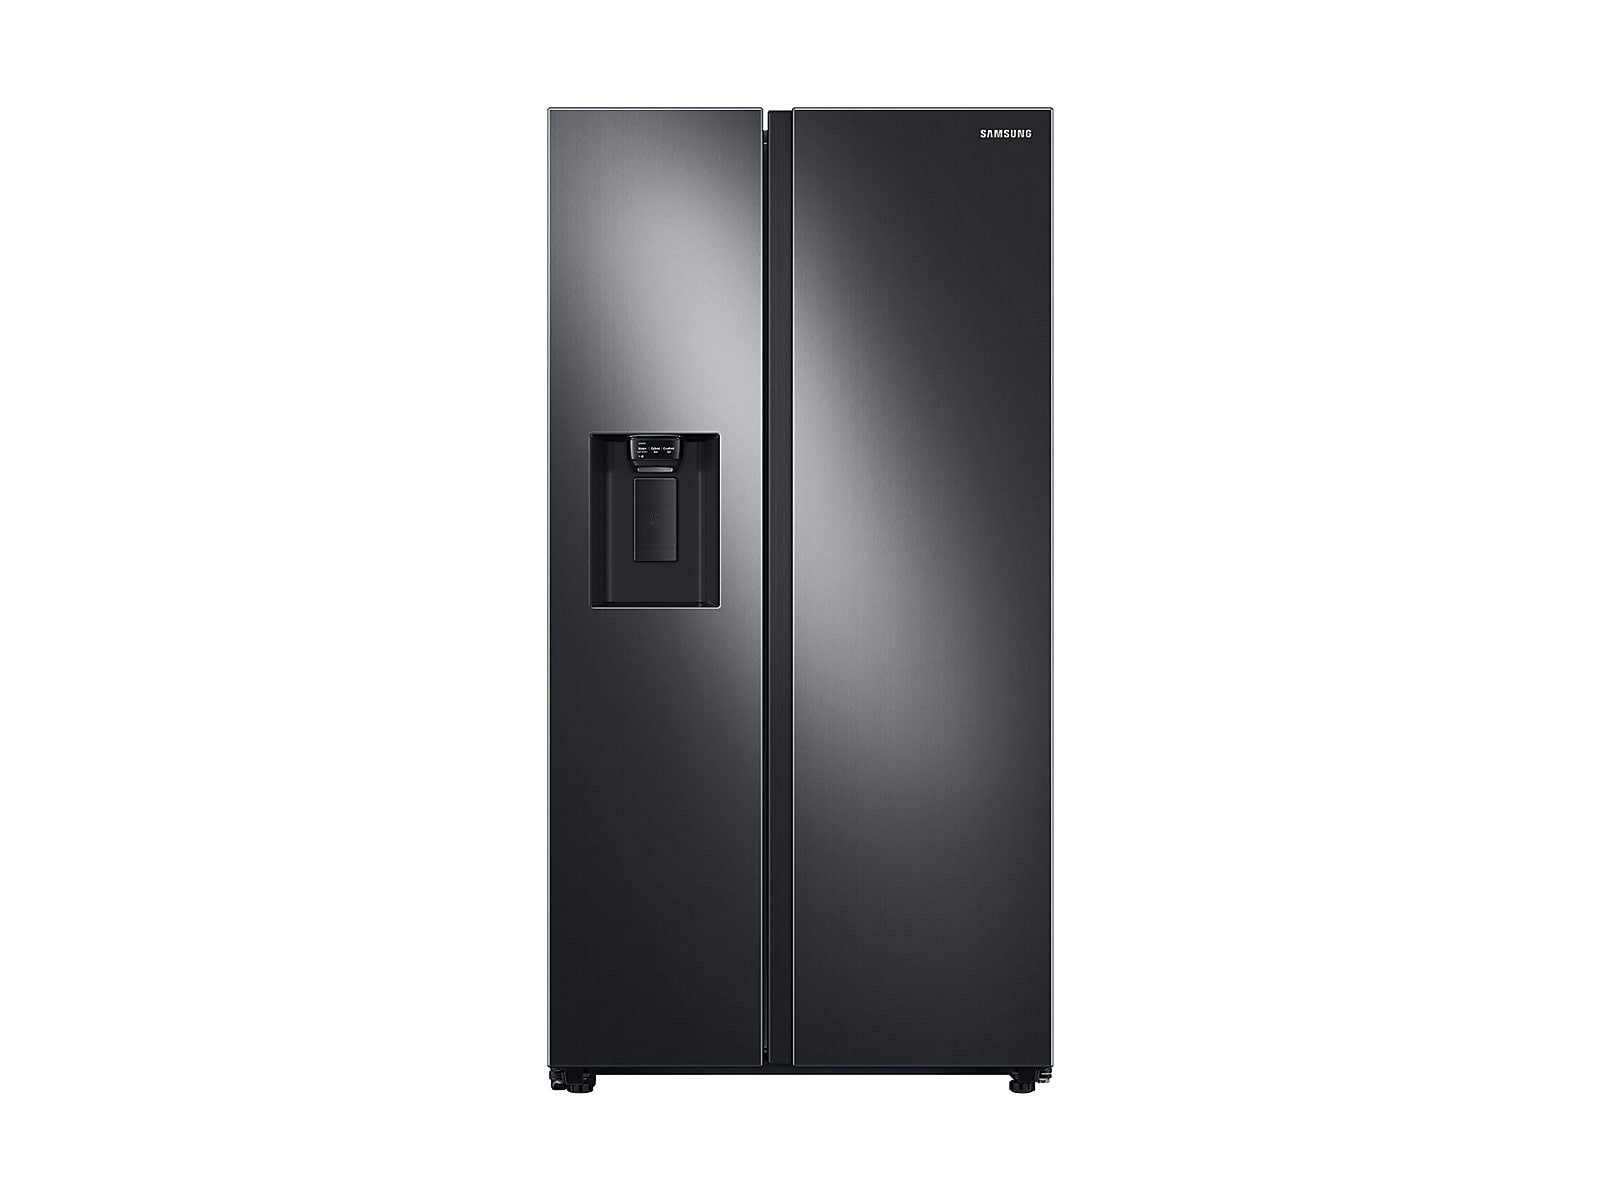 Samsung 27.4 cu. ft. Large Capacity Side-by-Side Refrigerator in Black Stainless Steel(RS27T5200SG/AA)